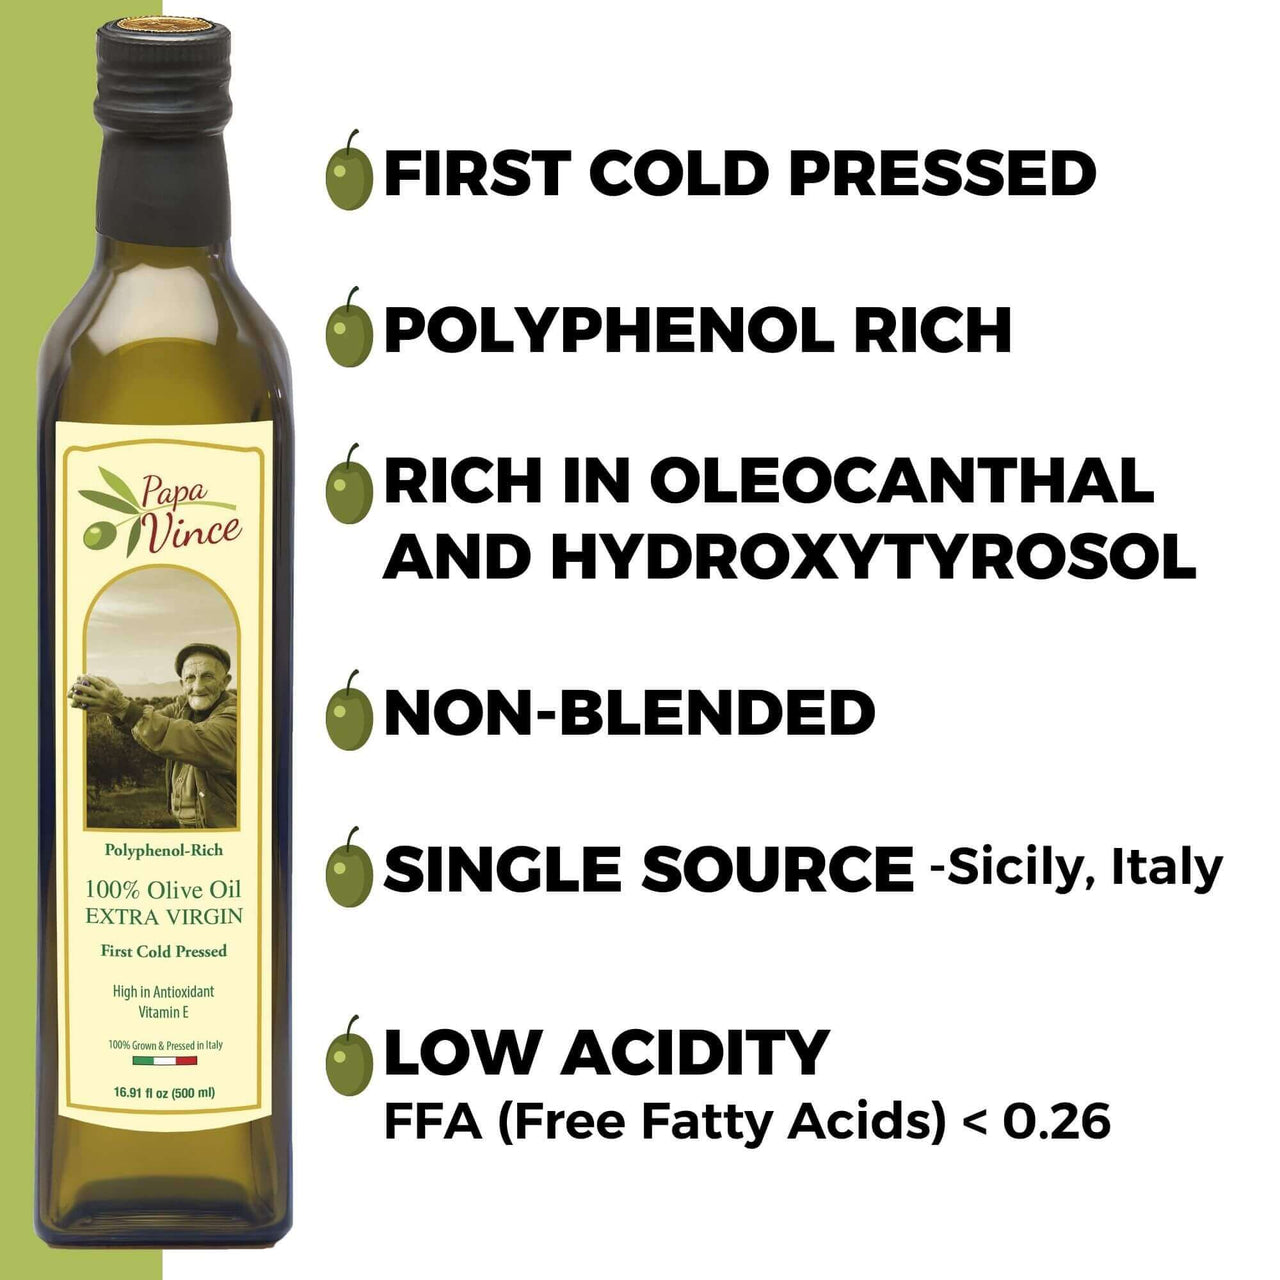 Papa Vince Olive Oil Extra Virgin Gift - Unblended, Family Harvest 2022/23, High in Polyphenols, Single Estate, First Cold Pressed, Sicily, Italy, Peppery Finish, Unfiltered, Unrefined, Natural Burlap Bag - Papa Vince